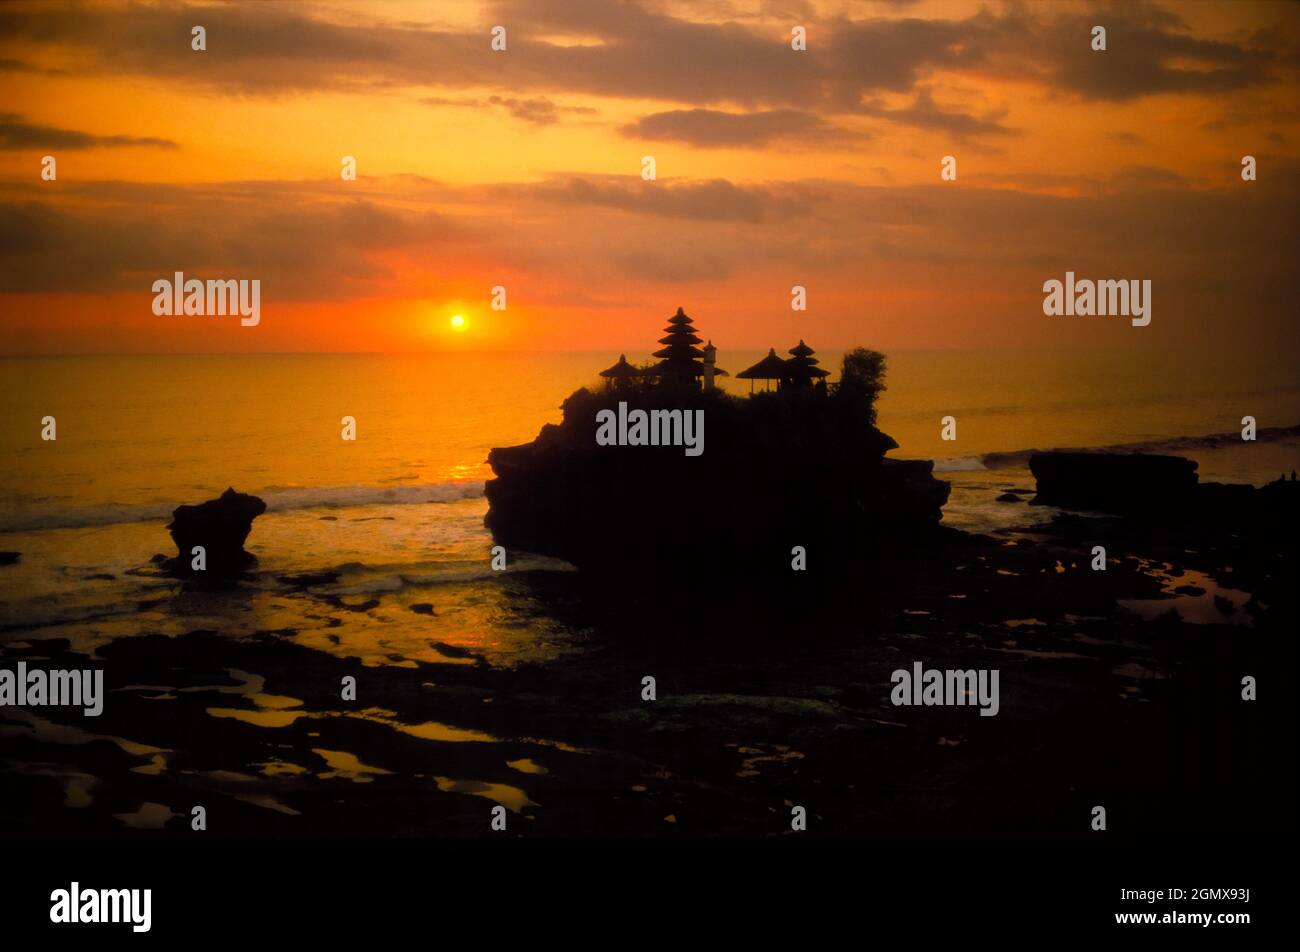 The coastal Hindu Temple of Tanah Lot is famed for its sunset photo opportunities - like this! Its name means Land in the Sea in the Balinese language Stock Photo